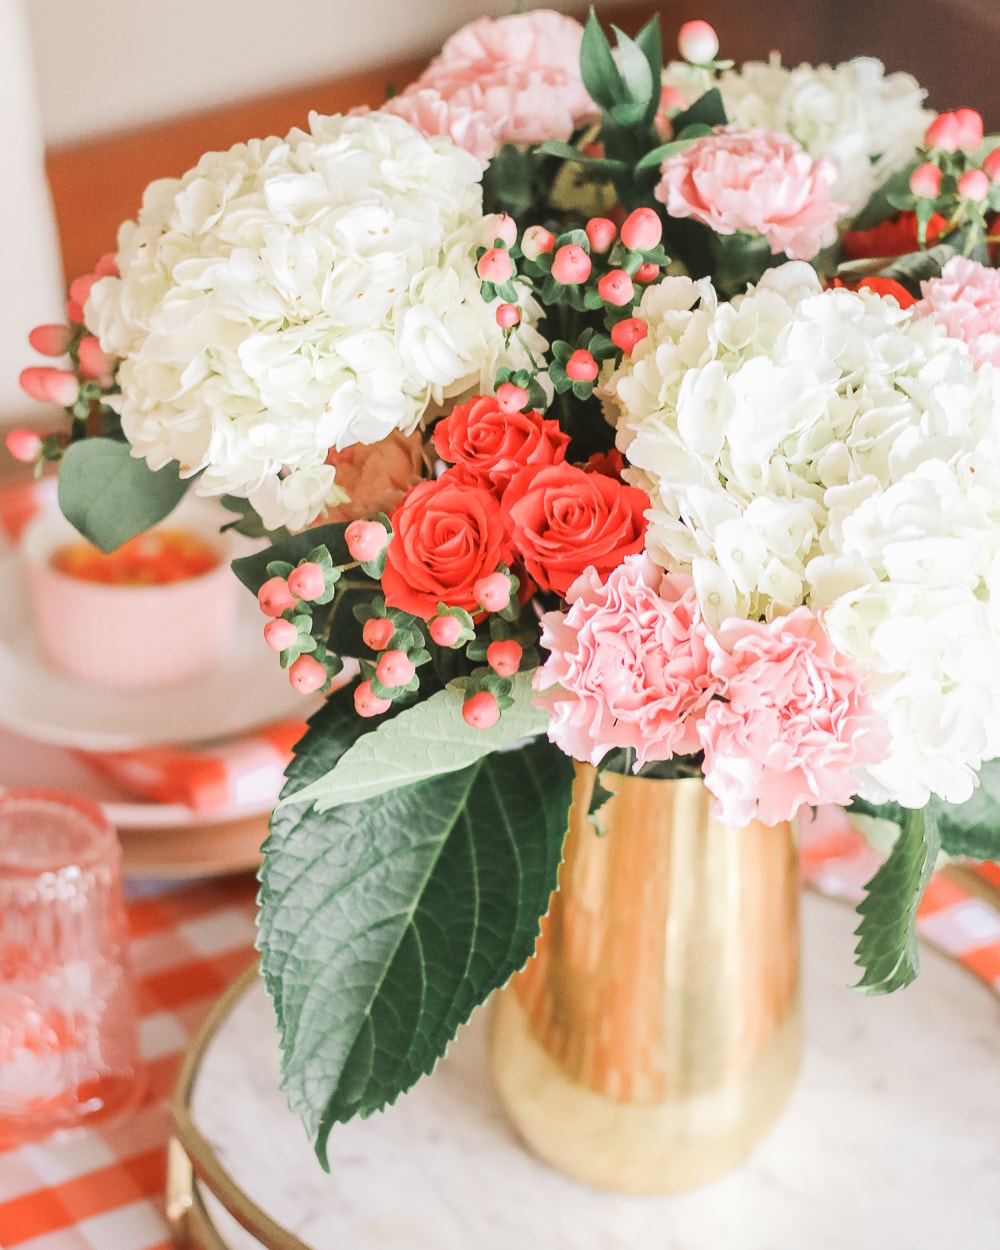 Pink and orange Halloween floral arrangement designed by southern lifestyle blogger Stephanie Ziajka on Diary of a Debutante